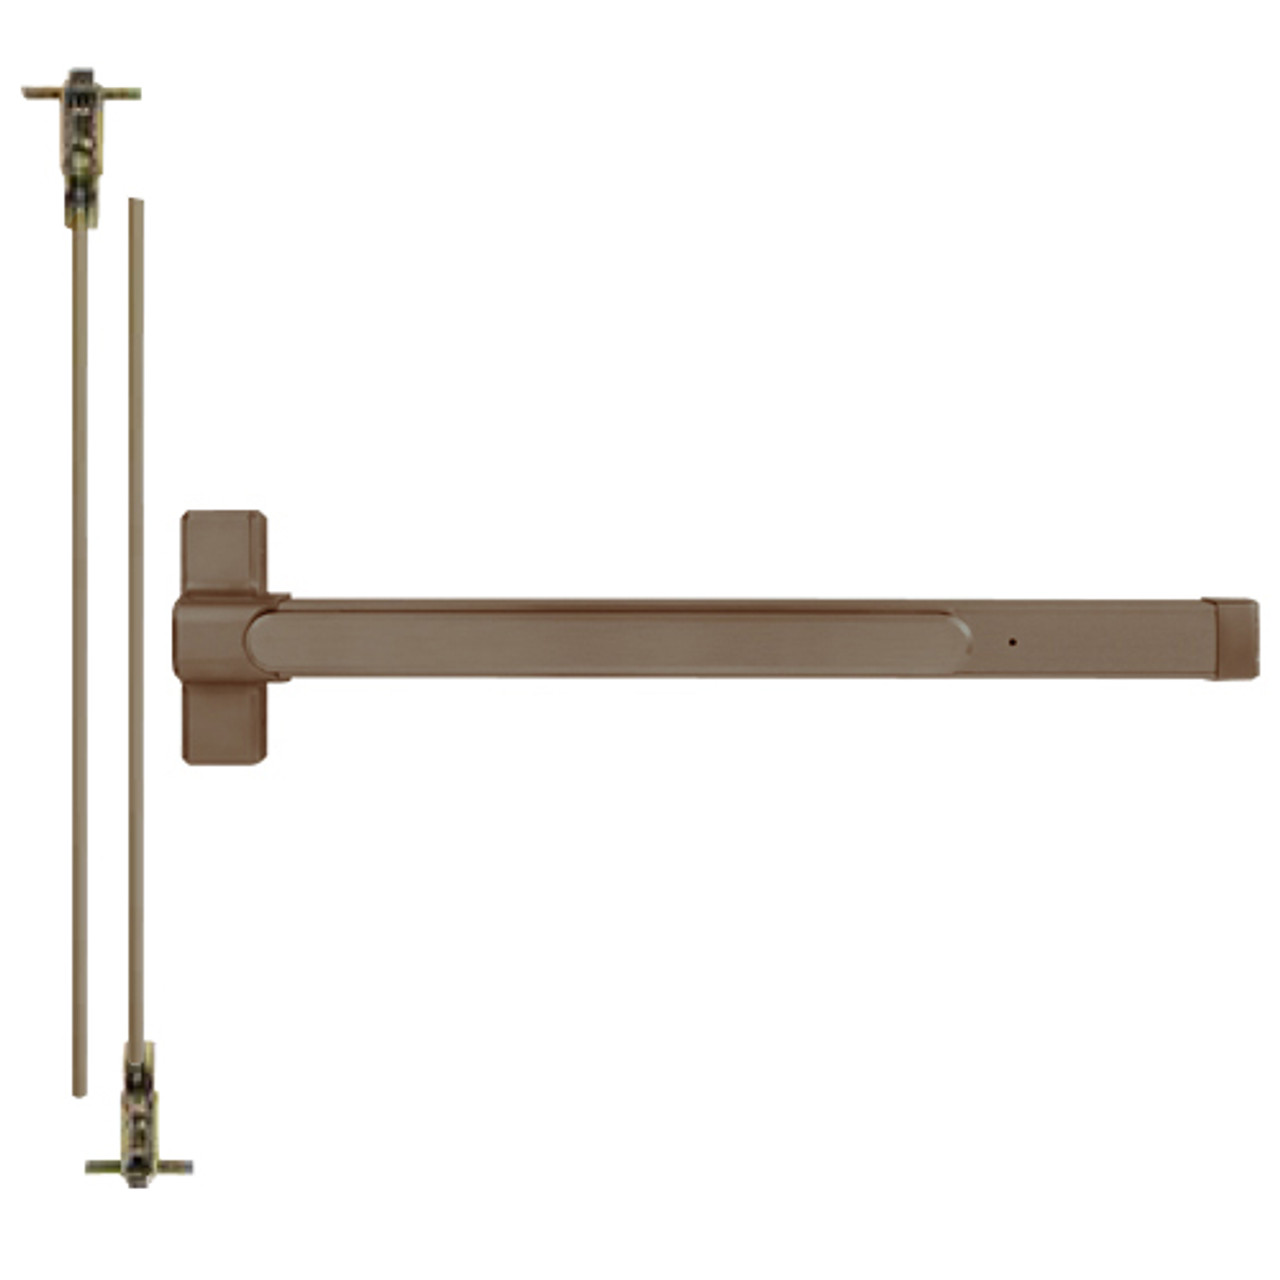 QED126LRX-36-7-313AN Stanley QED100 Series Heavy Duty Concealed Vertical Rod Fire Rated Exit Device in Anodized Duranodic Bronze Finish